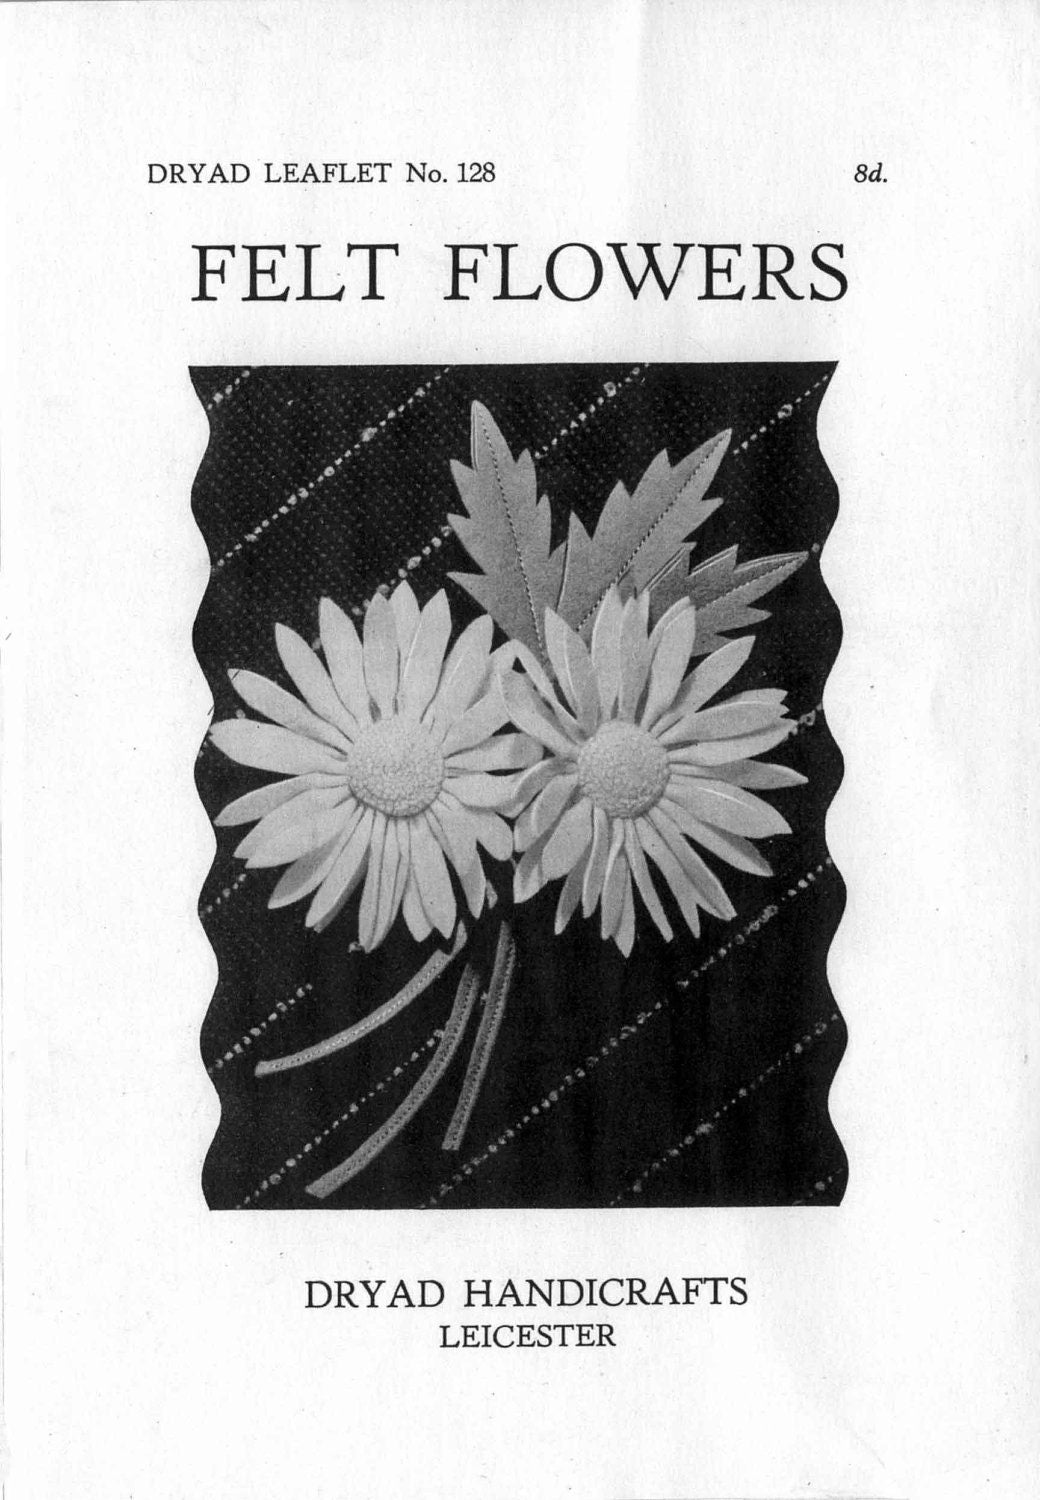 Felt Flowers from Dryad, 40s Sewing Pattern for Felt Flowers, Dryad 128